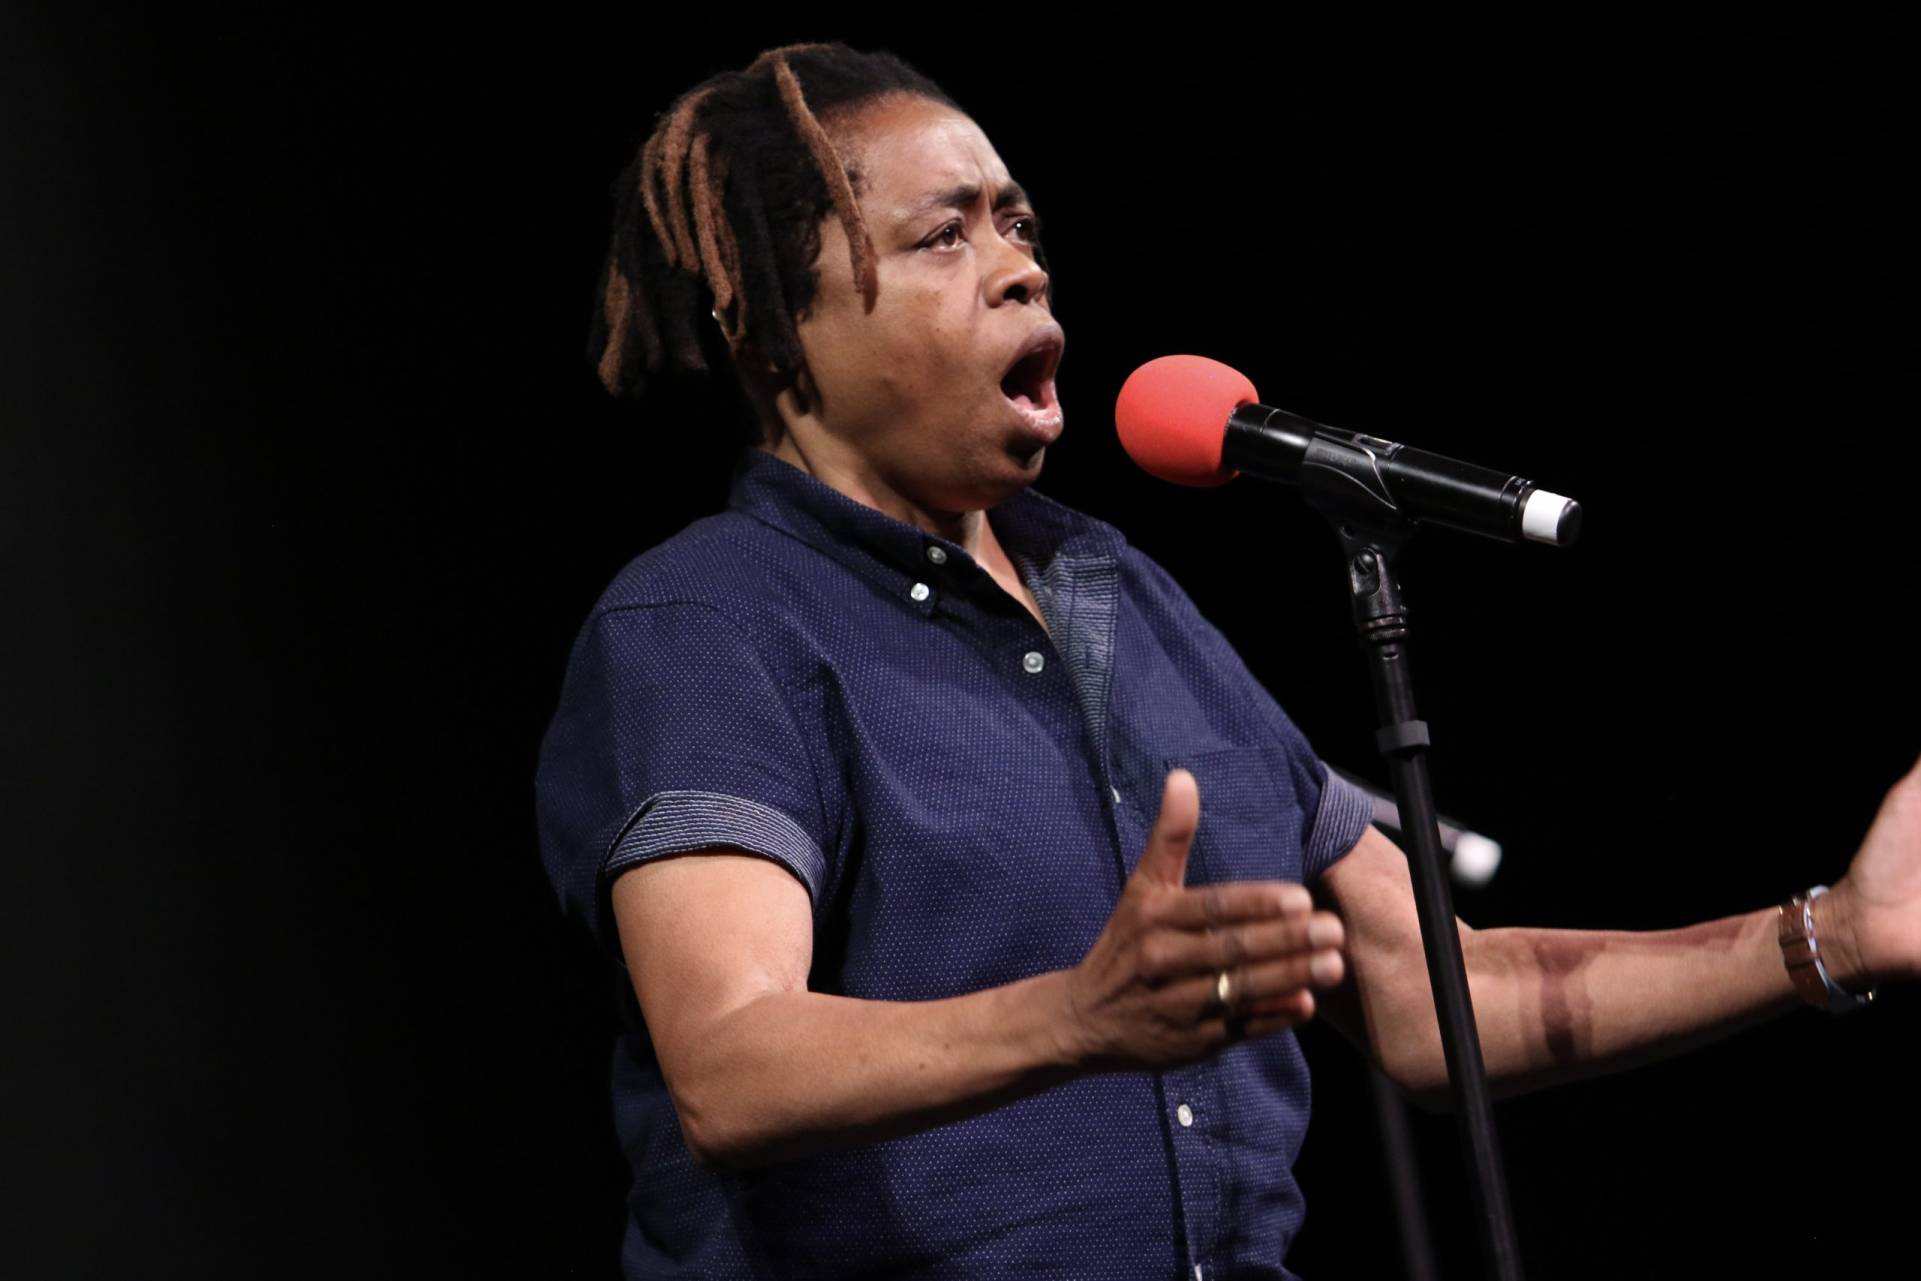 Melanie Demore sings into a microphone at Festival 2016 in Denver.